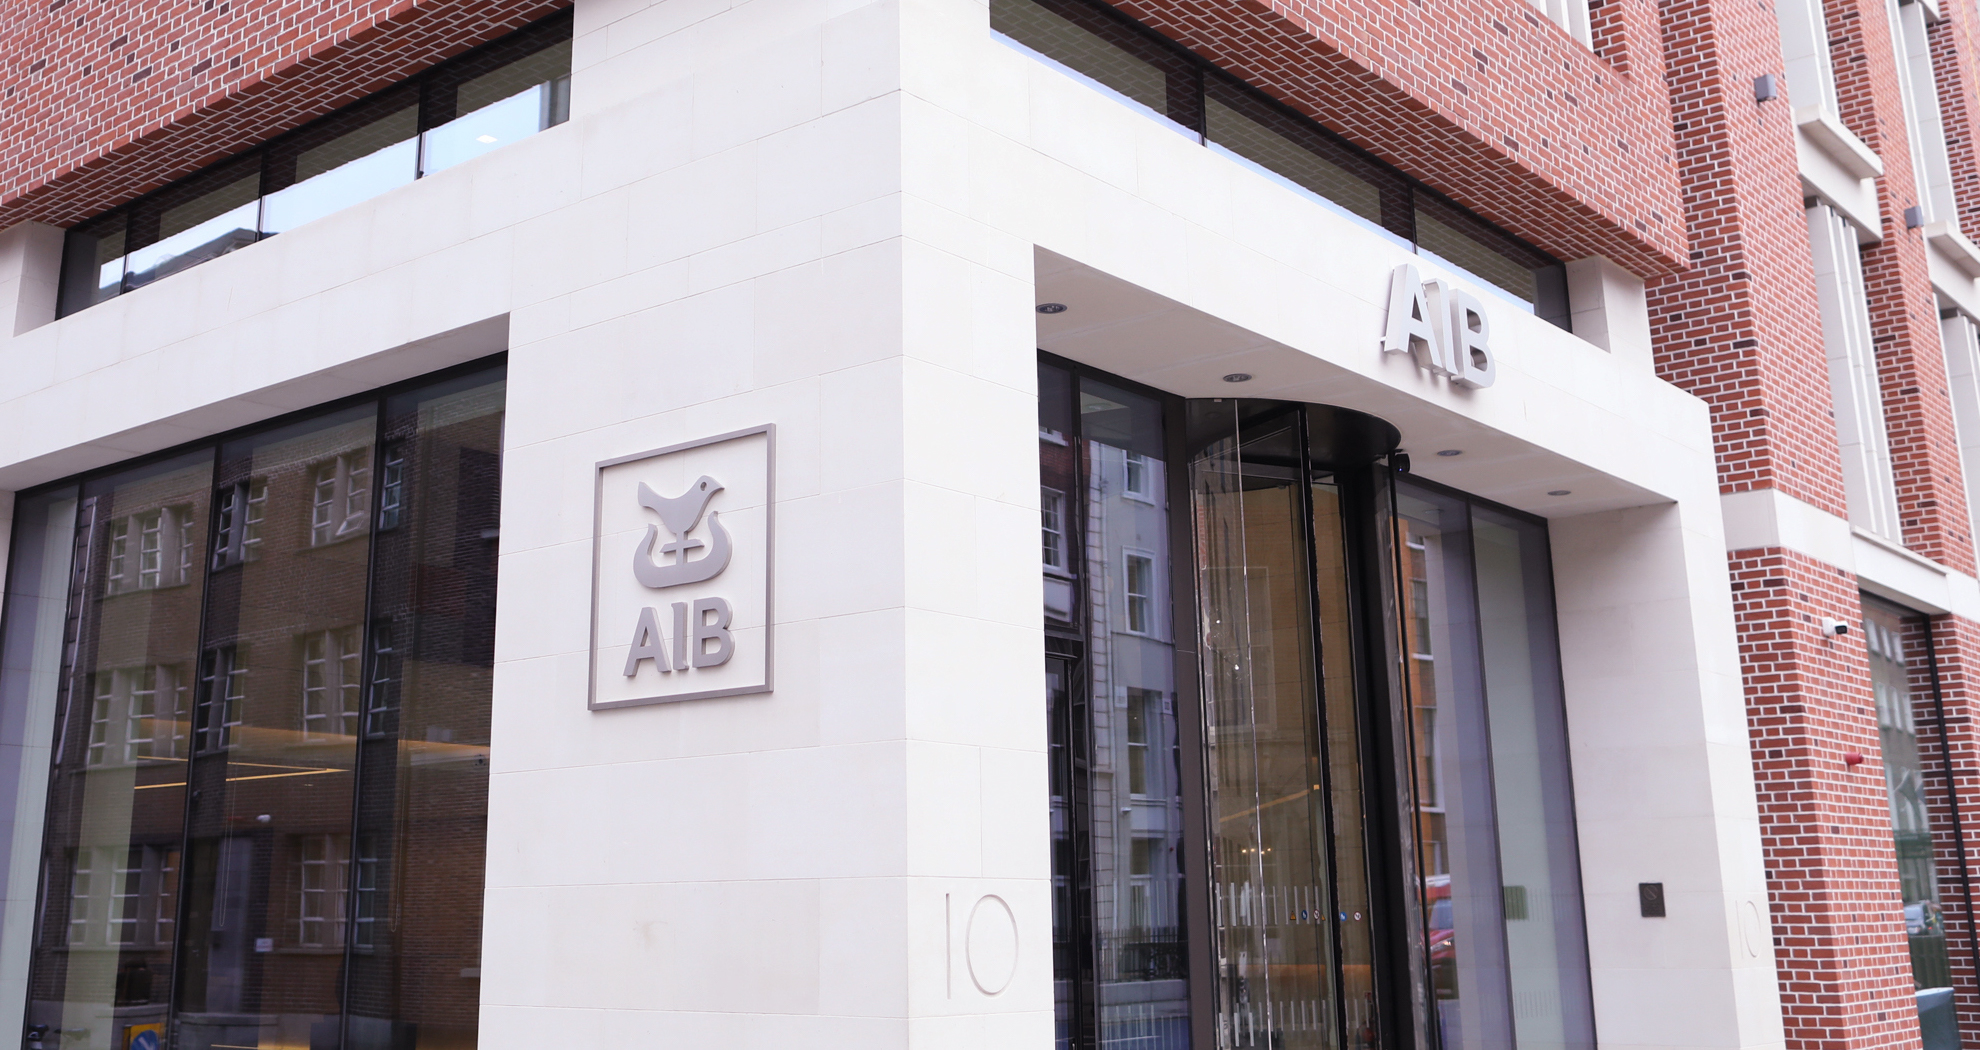 View of AIB Head Office from outside the building